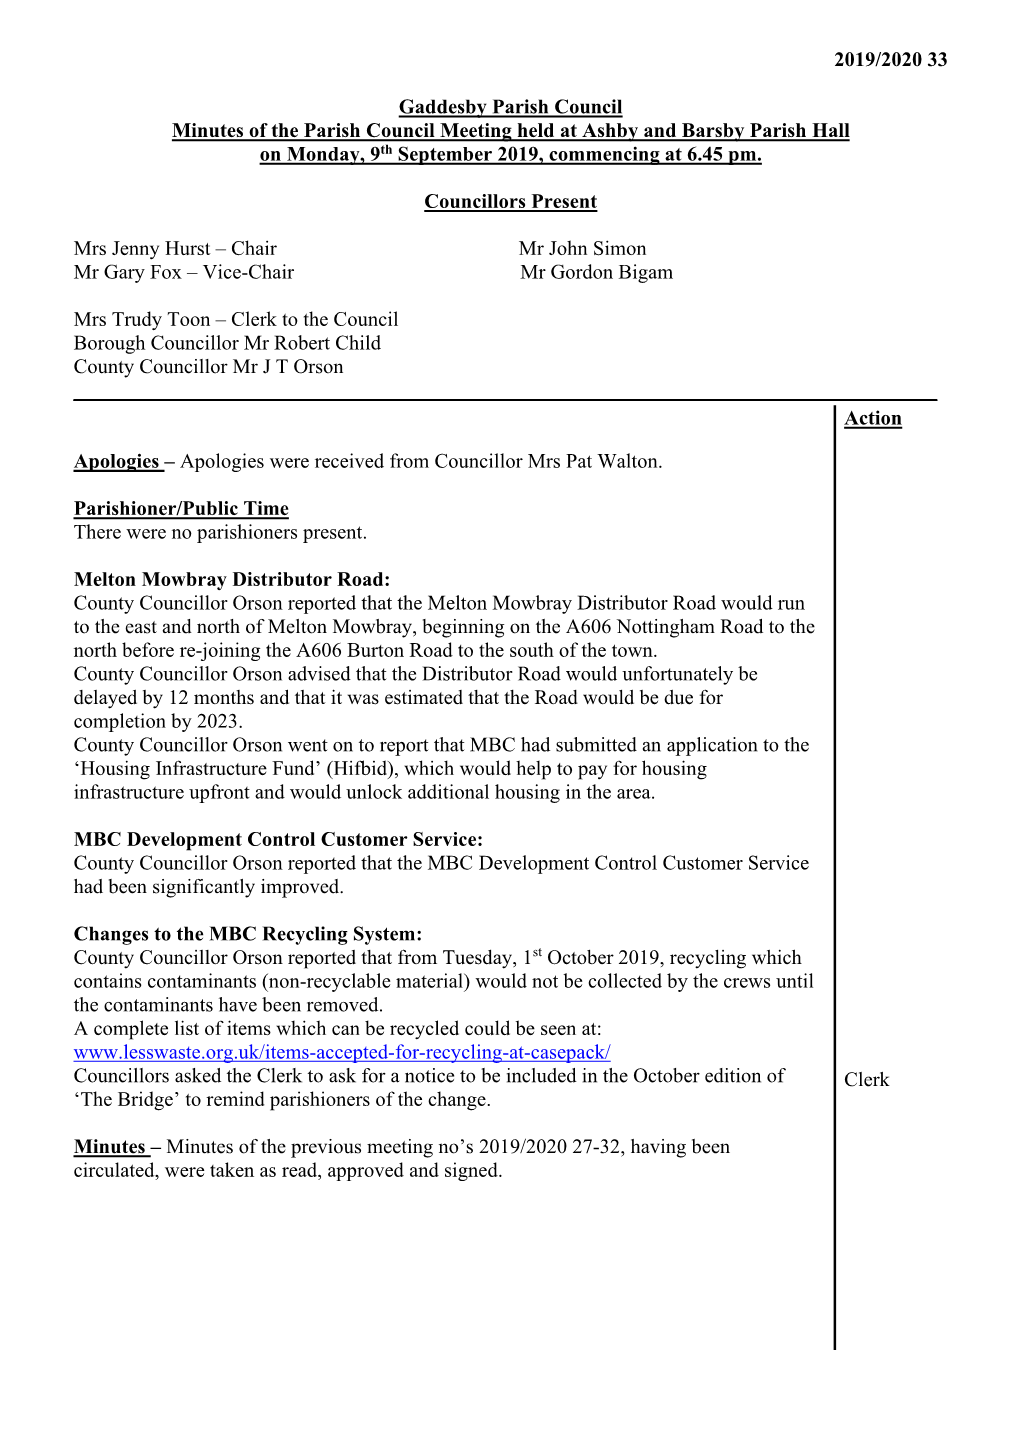 2019/2020 33 Gaddesby Parish Council Minutes of the Parish Council Meeting Held at Ashby and Barsby Parish Hall on Monday, 9Th S